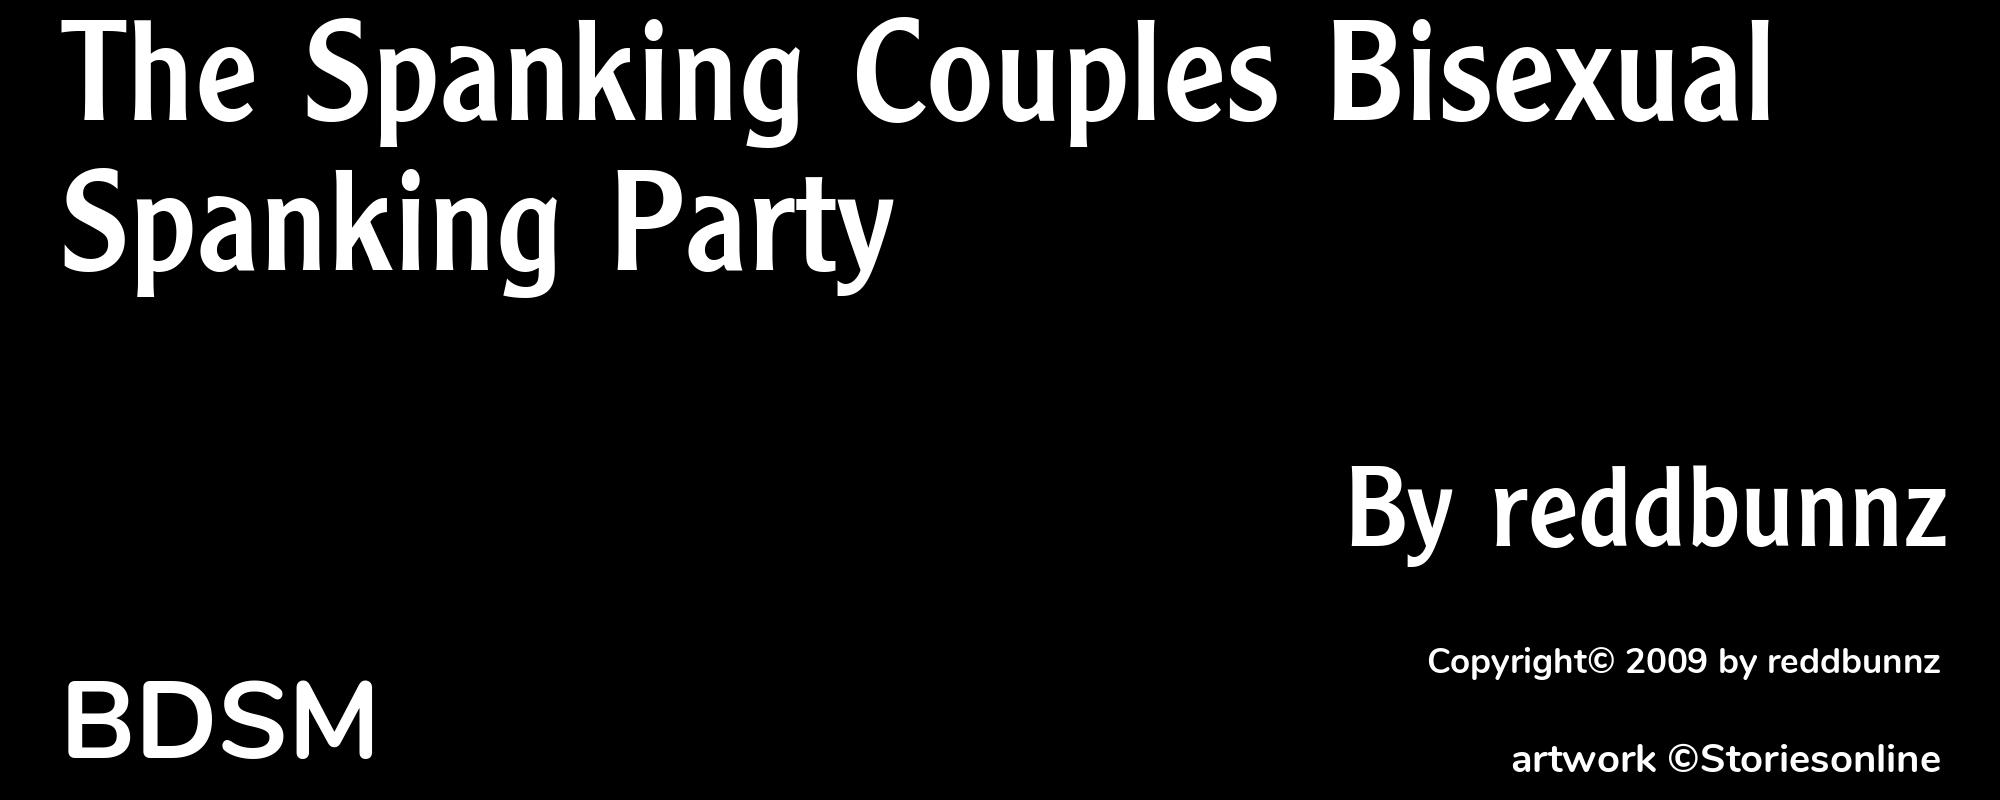 The Spanking Couples Bisexual Spanking Party - Cover